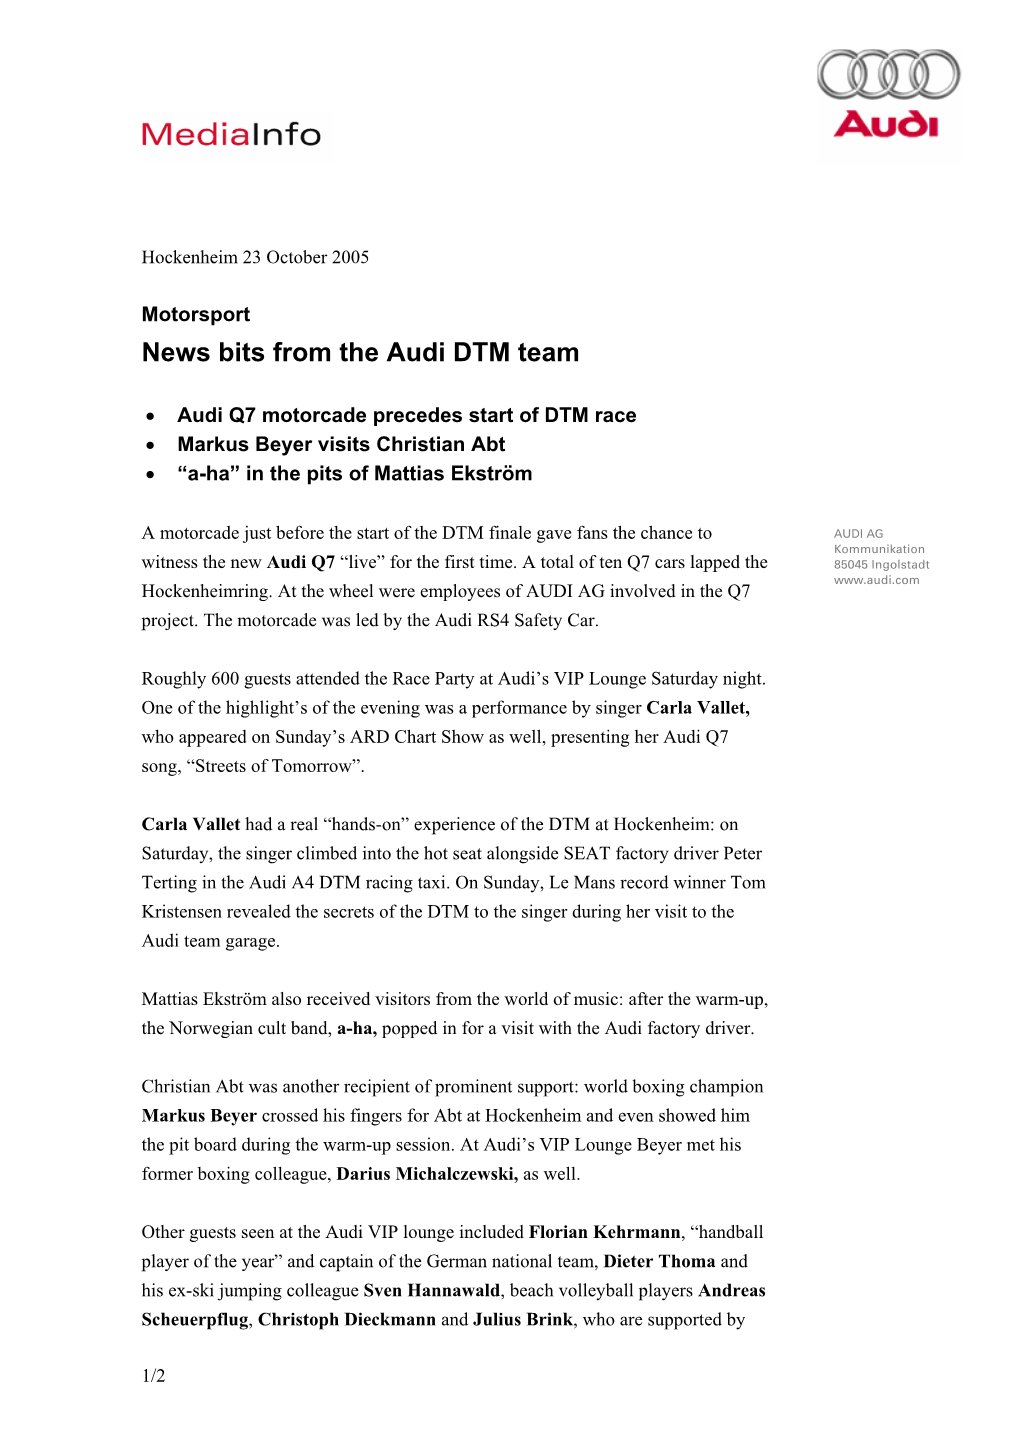 News Bits from the Audi DTM Team